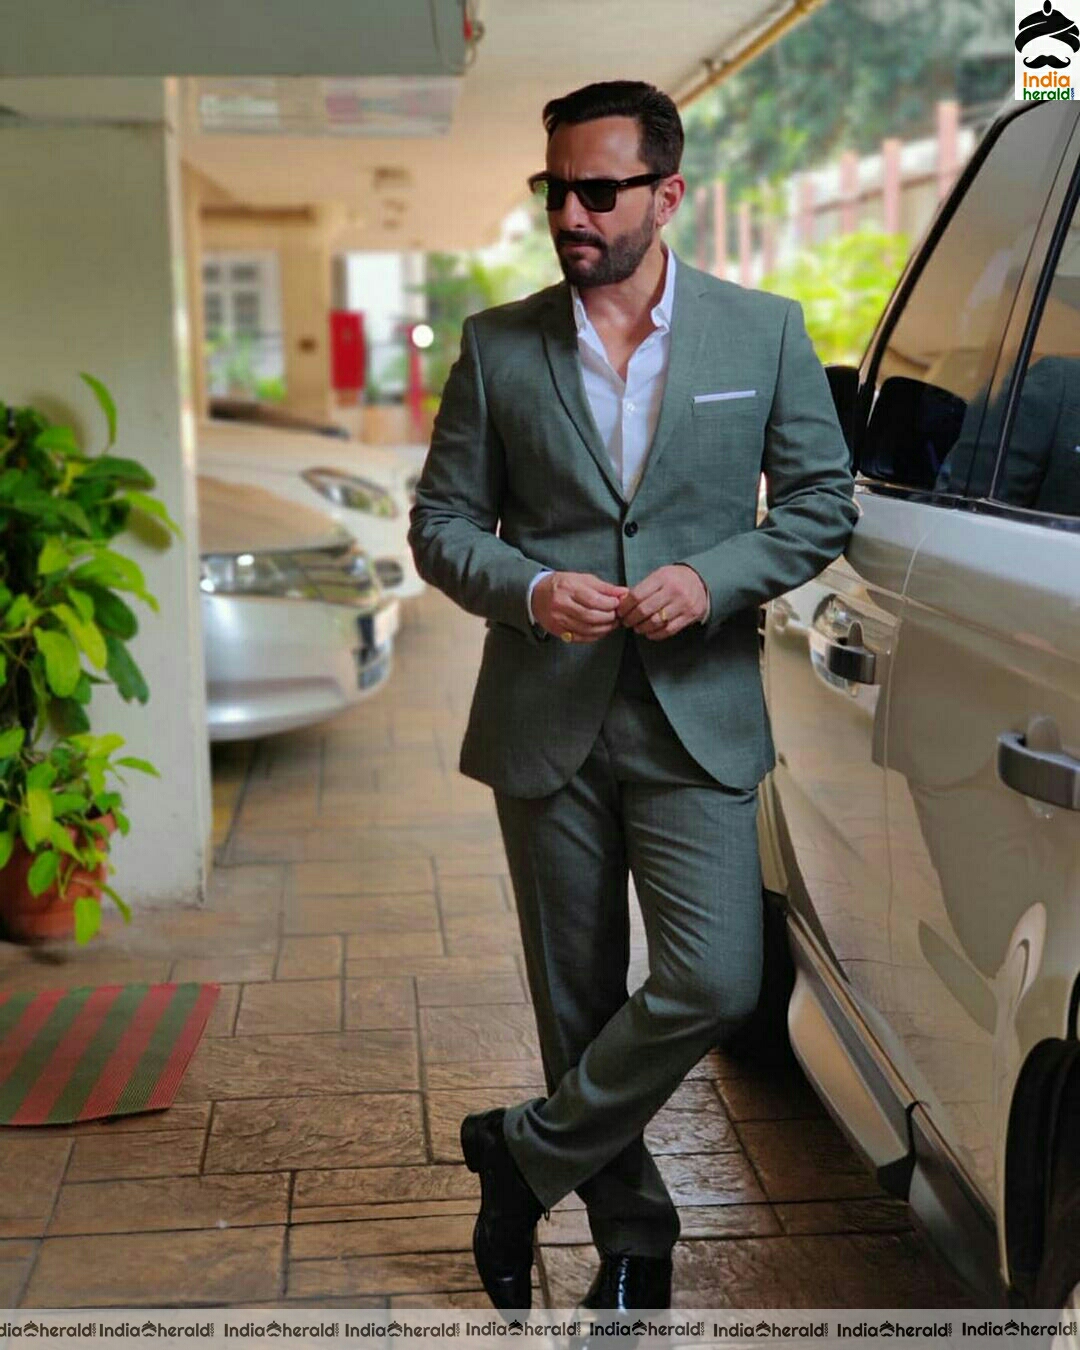 Saif Ali Khan At Set For The Trailer Launch Of Tanhaji The Unsung Warrier